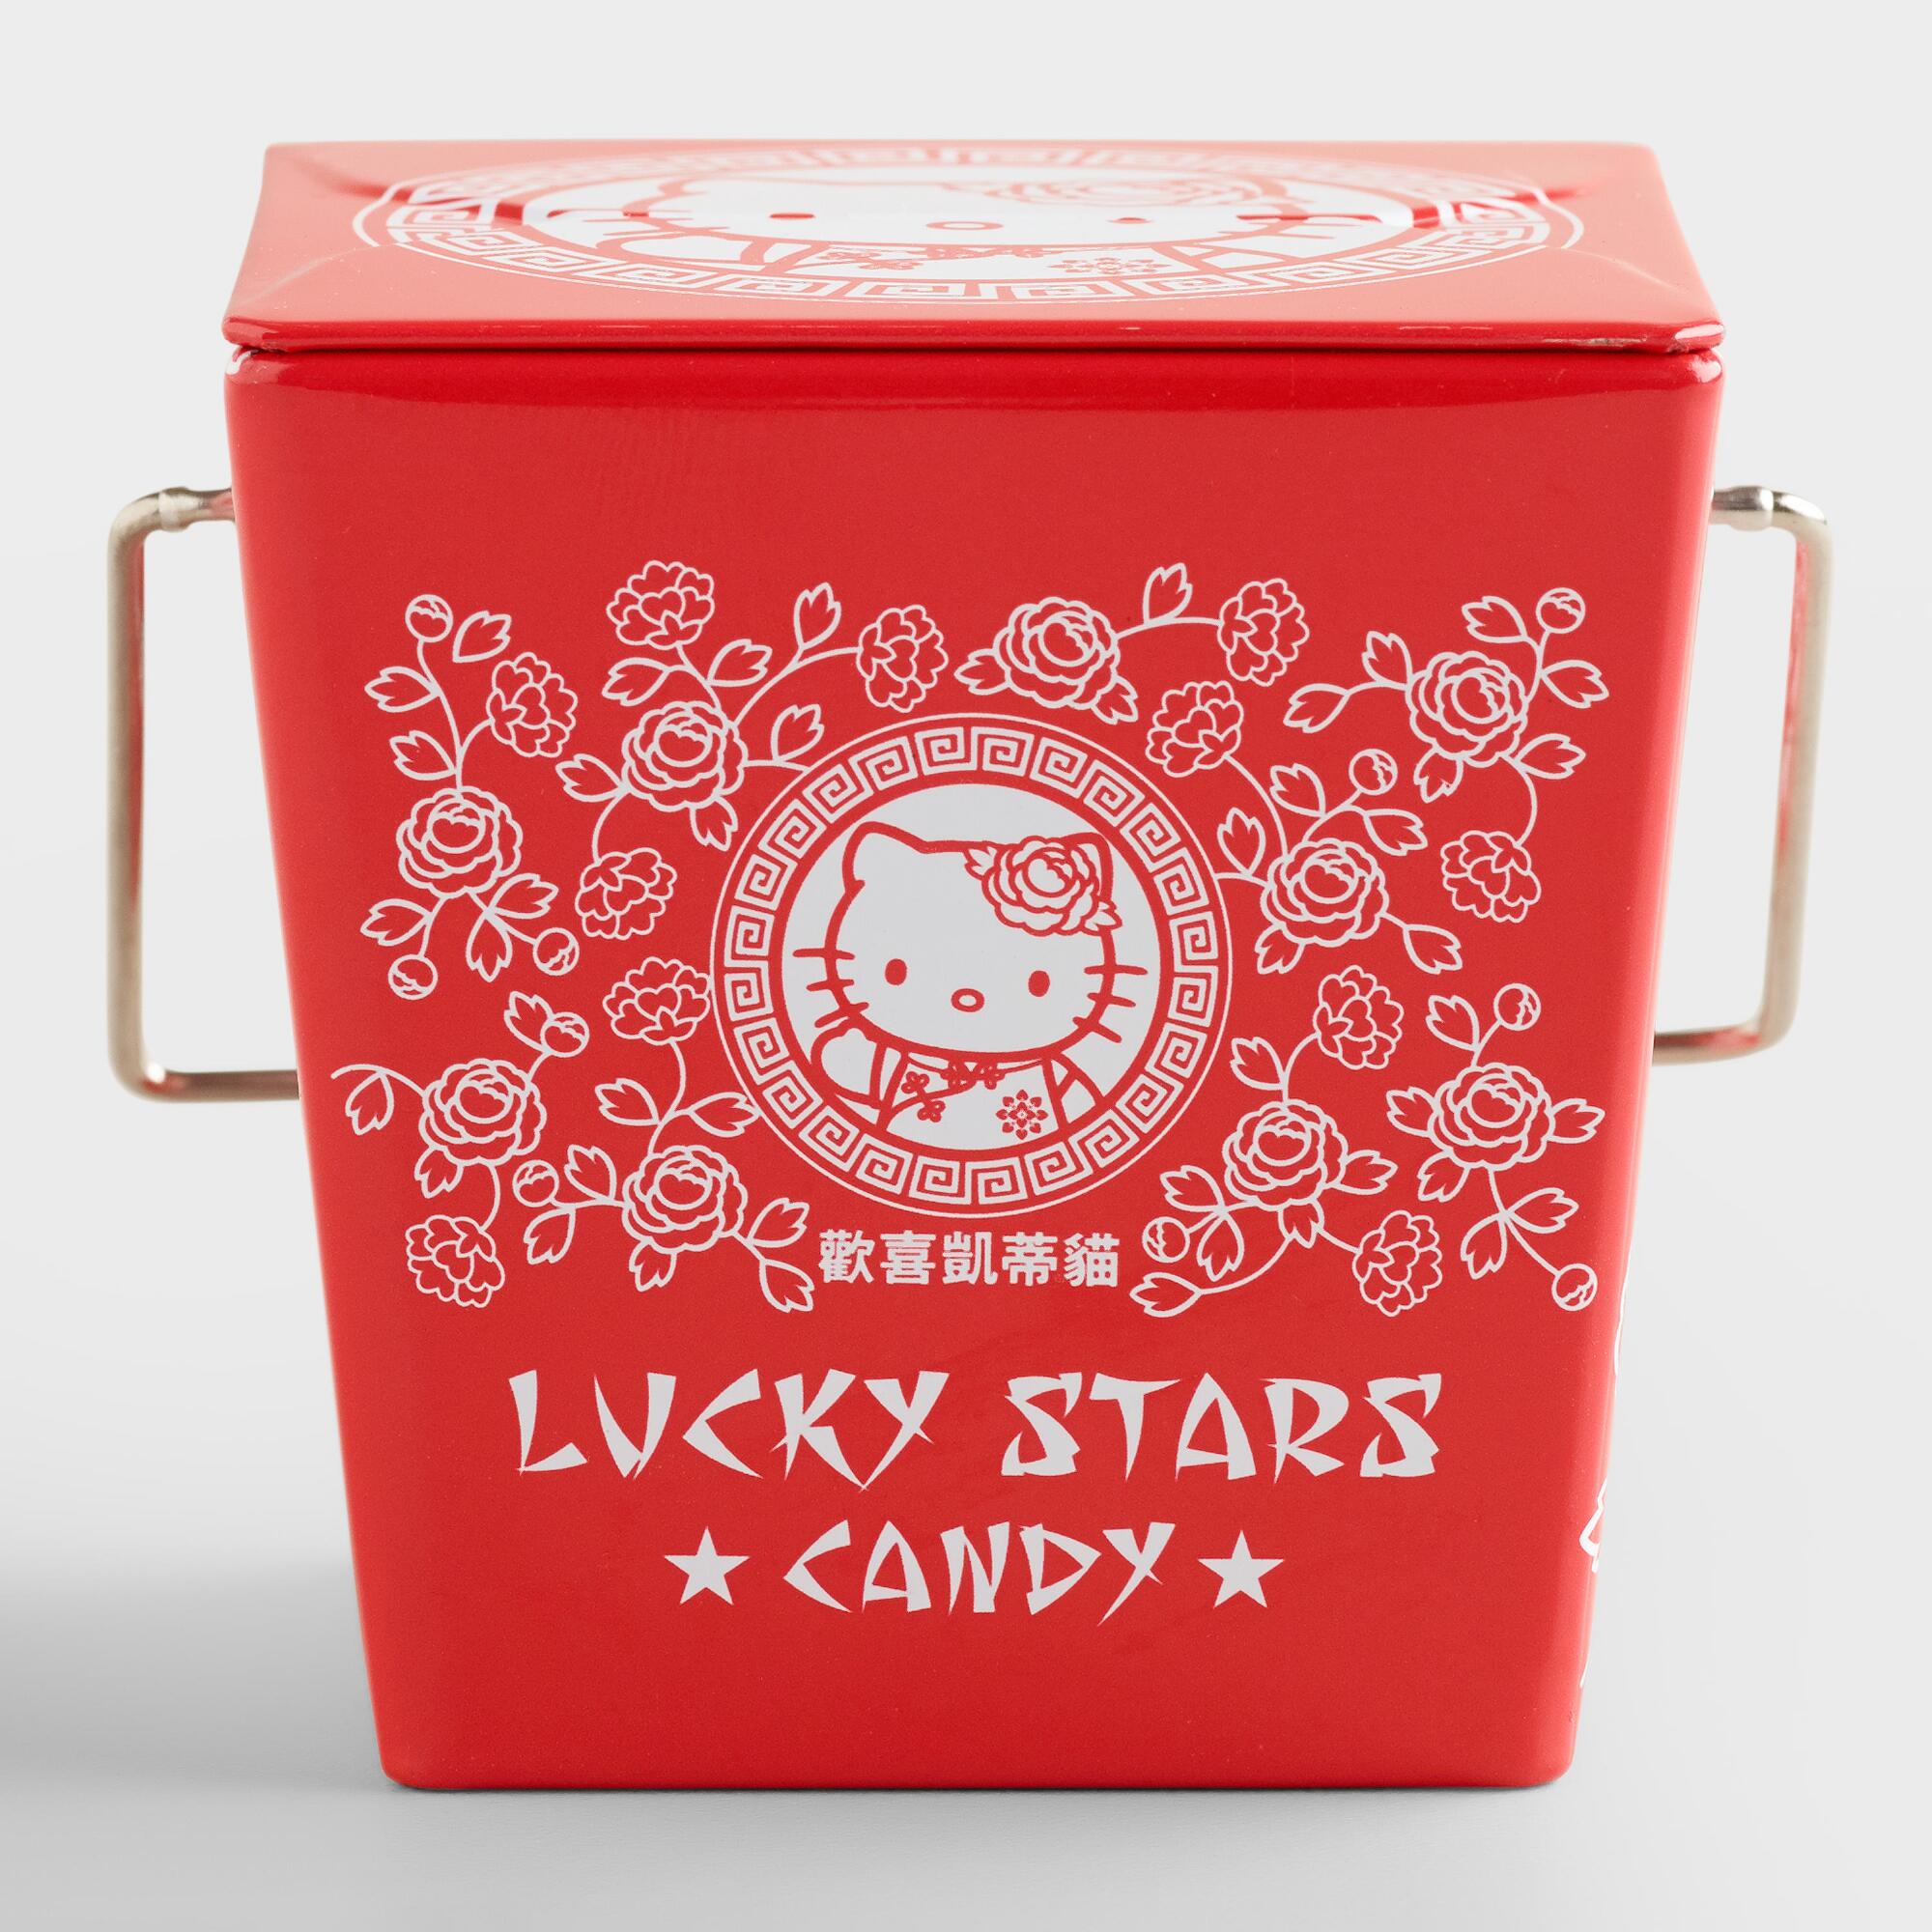 Hello Kitty Lucky Stars Candy Tins, Set of 3 by World Market